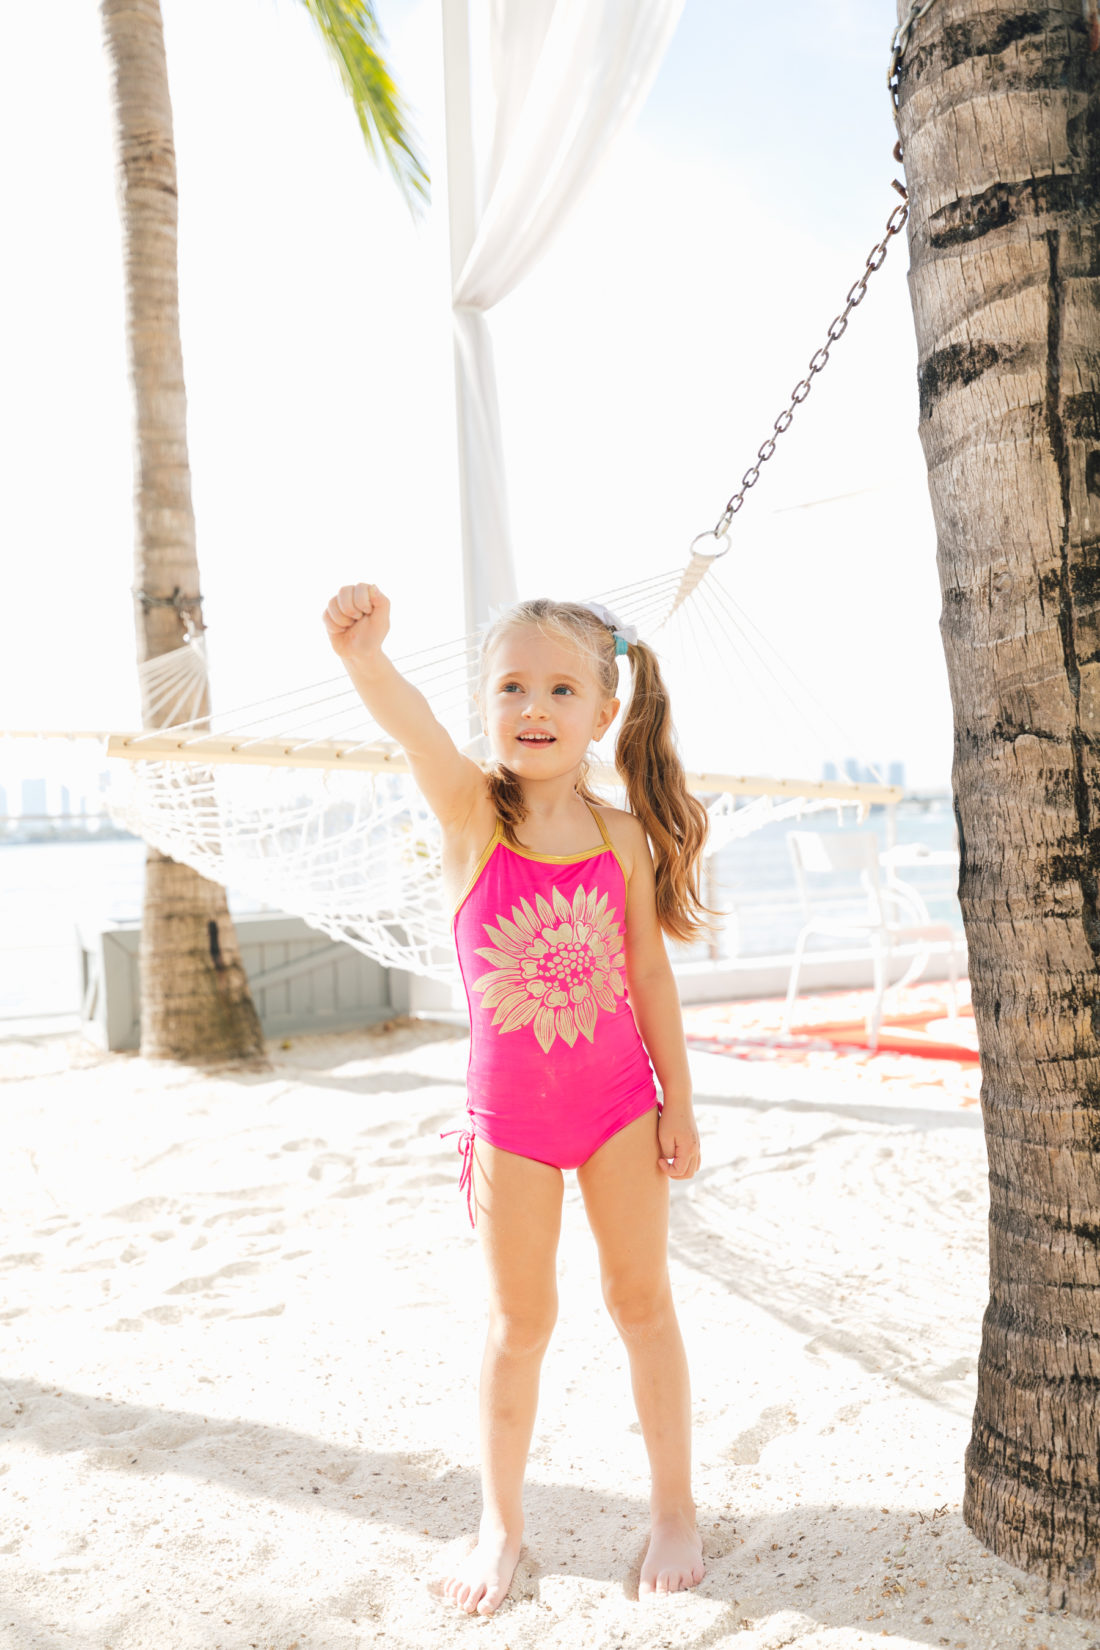 Marlowe Martino wears a pink and gold floral bathing suit on the beach in miami as part of the Happily Eva After x Masala Baby lookbook